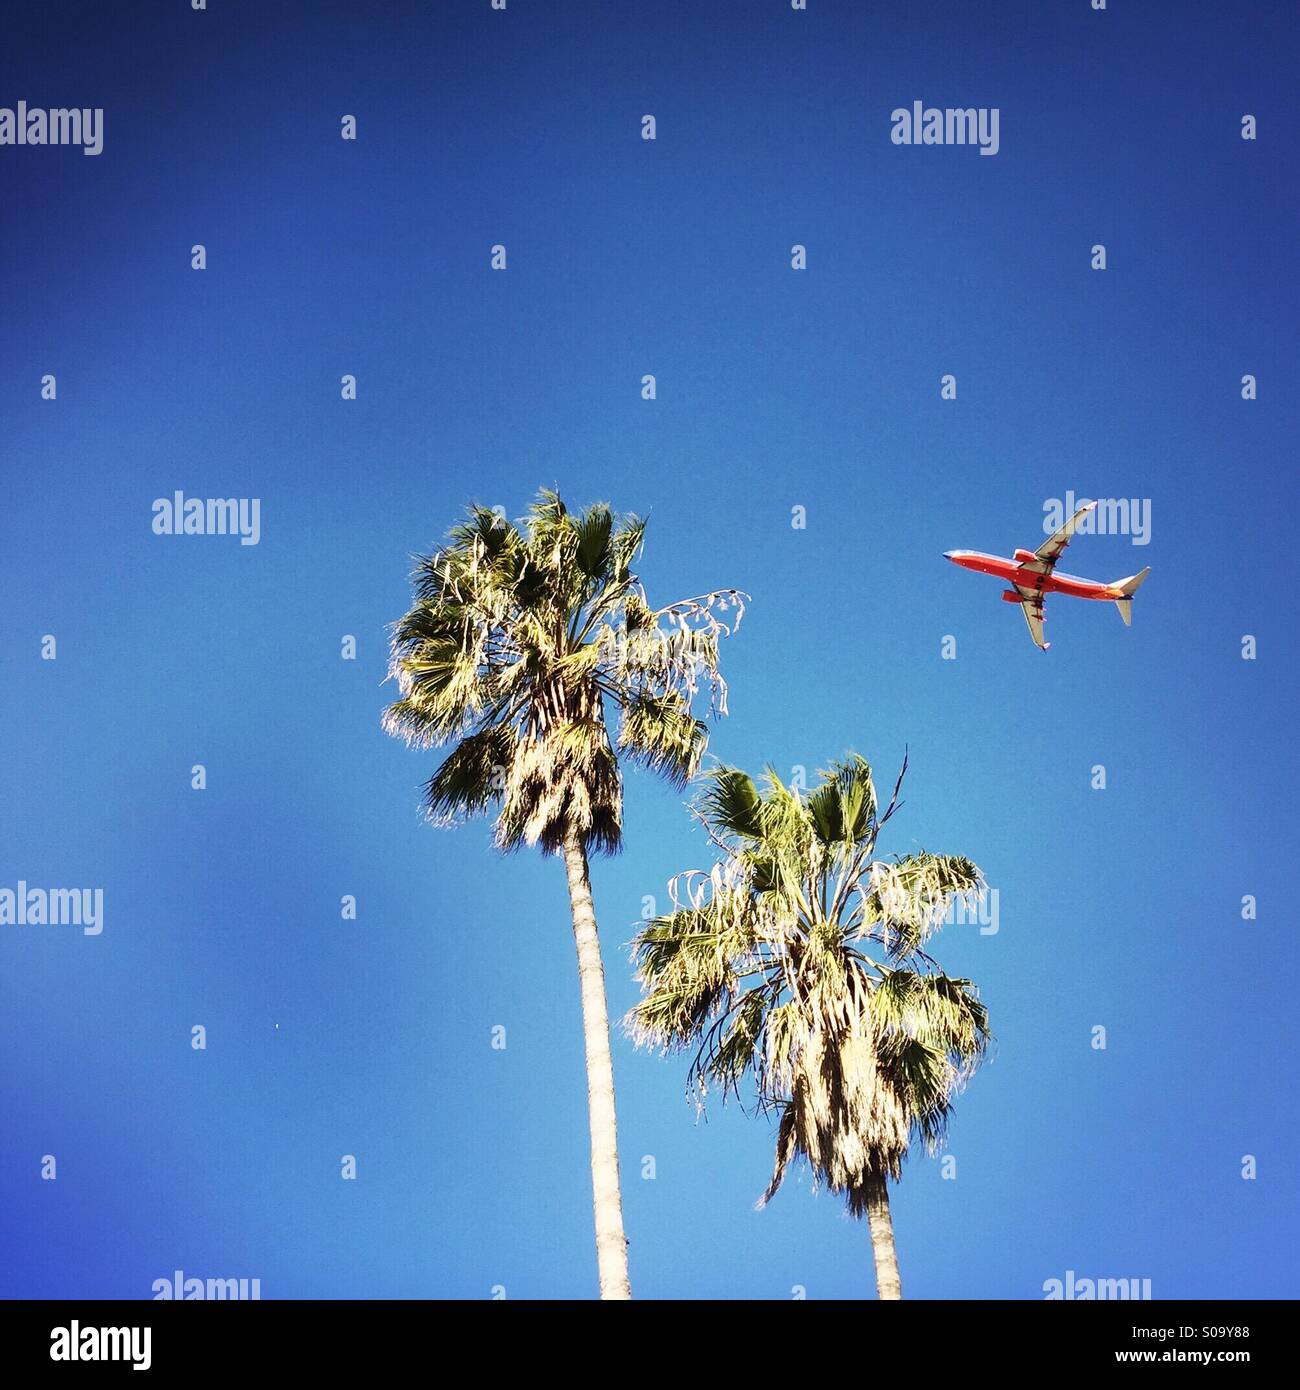 A southwest airplane flys above two Palm trees after taking off from LAX airport on a clear sunny day. Los Angeles, California USA. Stock Photo